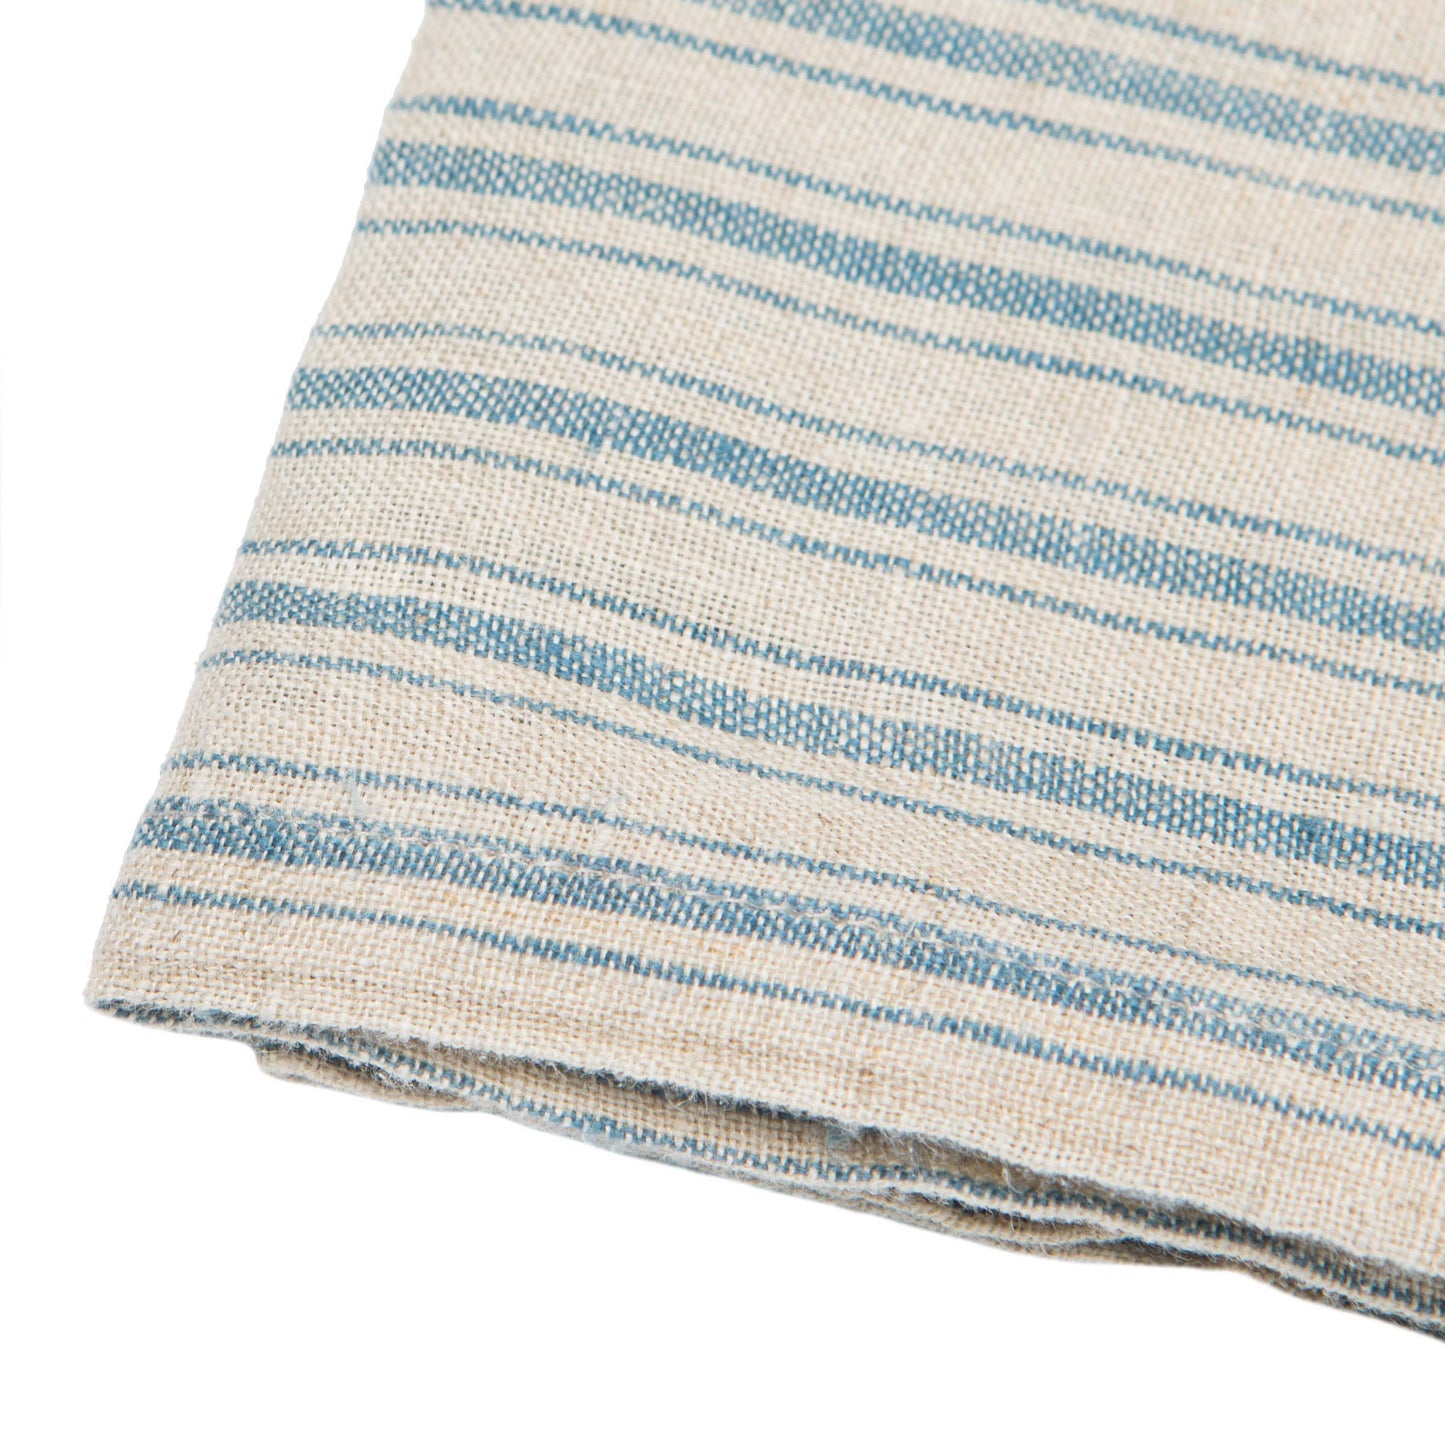 Boat Stripe Linen Towel - blue and ivory